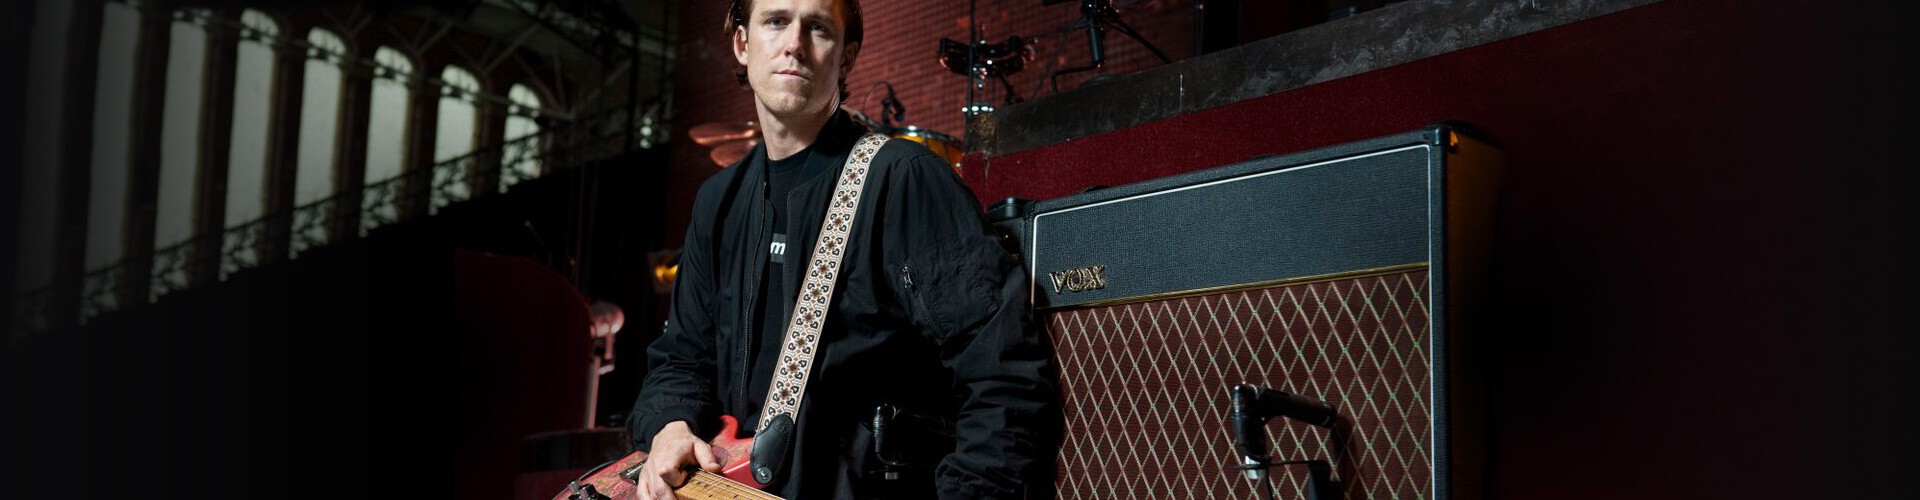 artist, Rob Ackroyd, holding electric guitar standing next to VOX amplifier